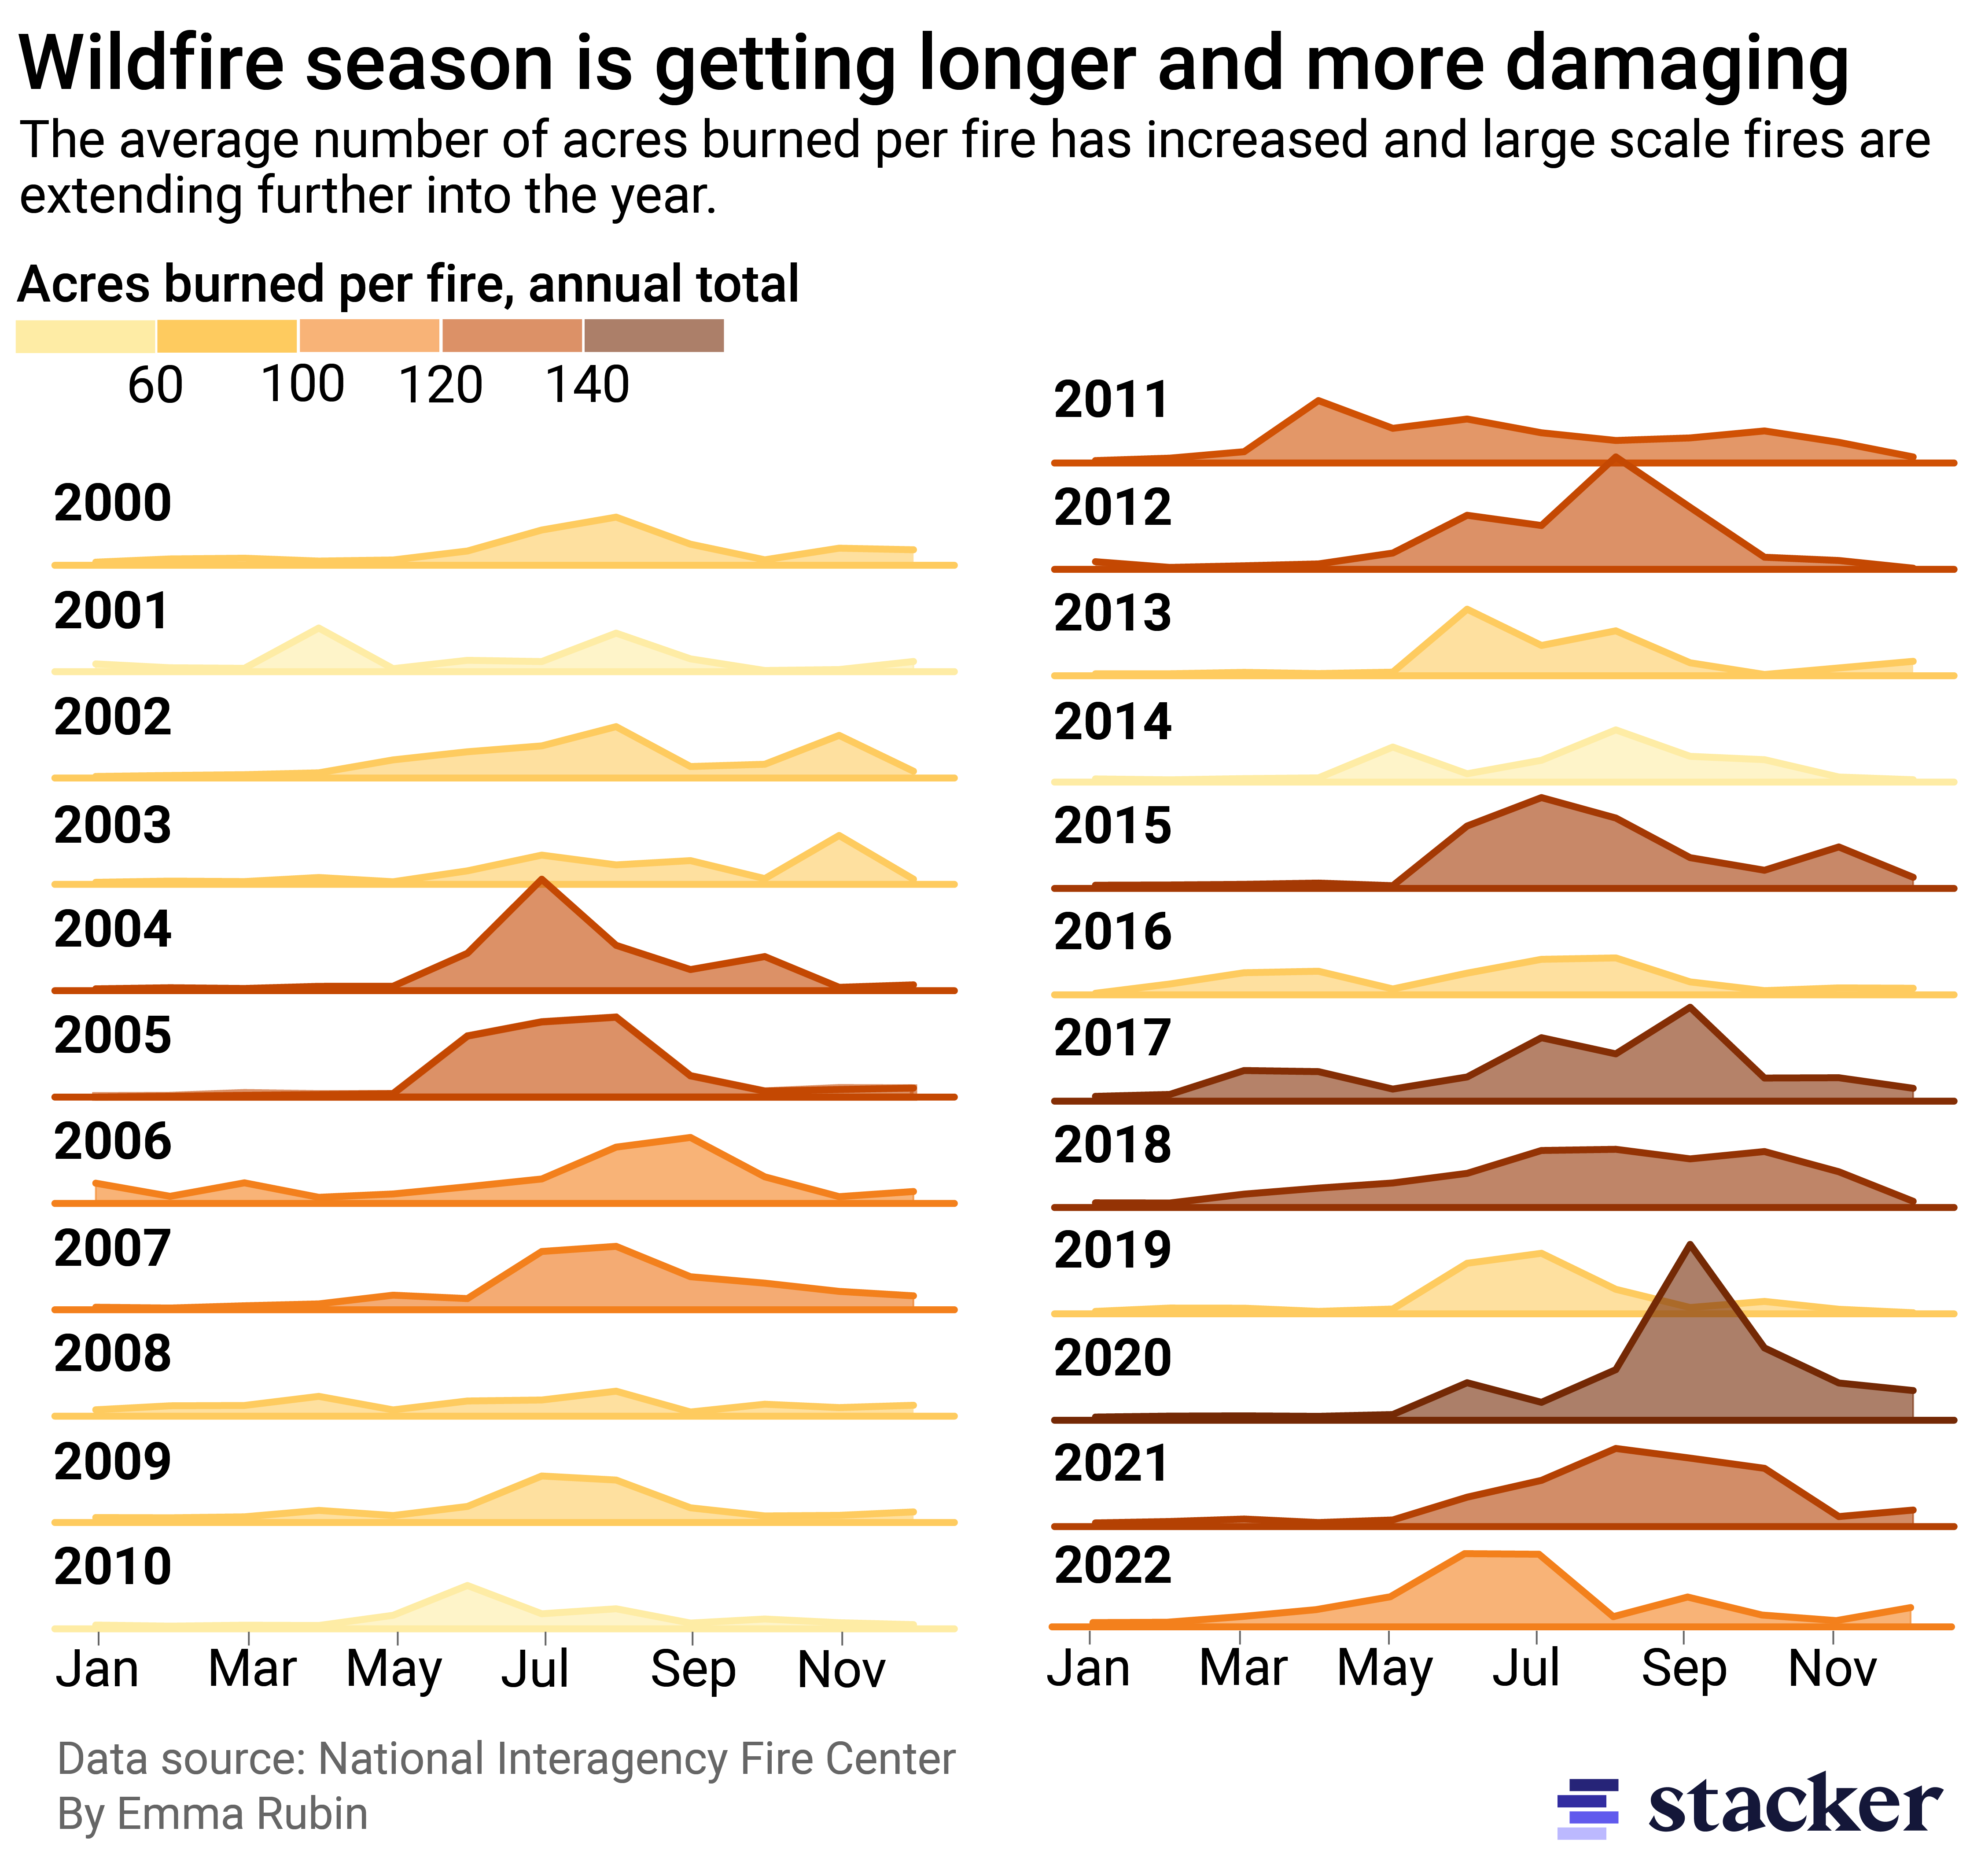 Ridgeline plot showing wildfire season is getting longer and more damaging. The average number of acres burned per fire has increased and large scale fires are extending further into the year.